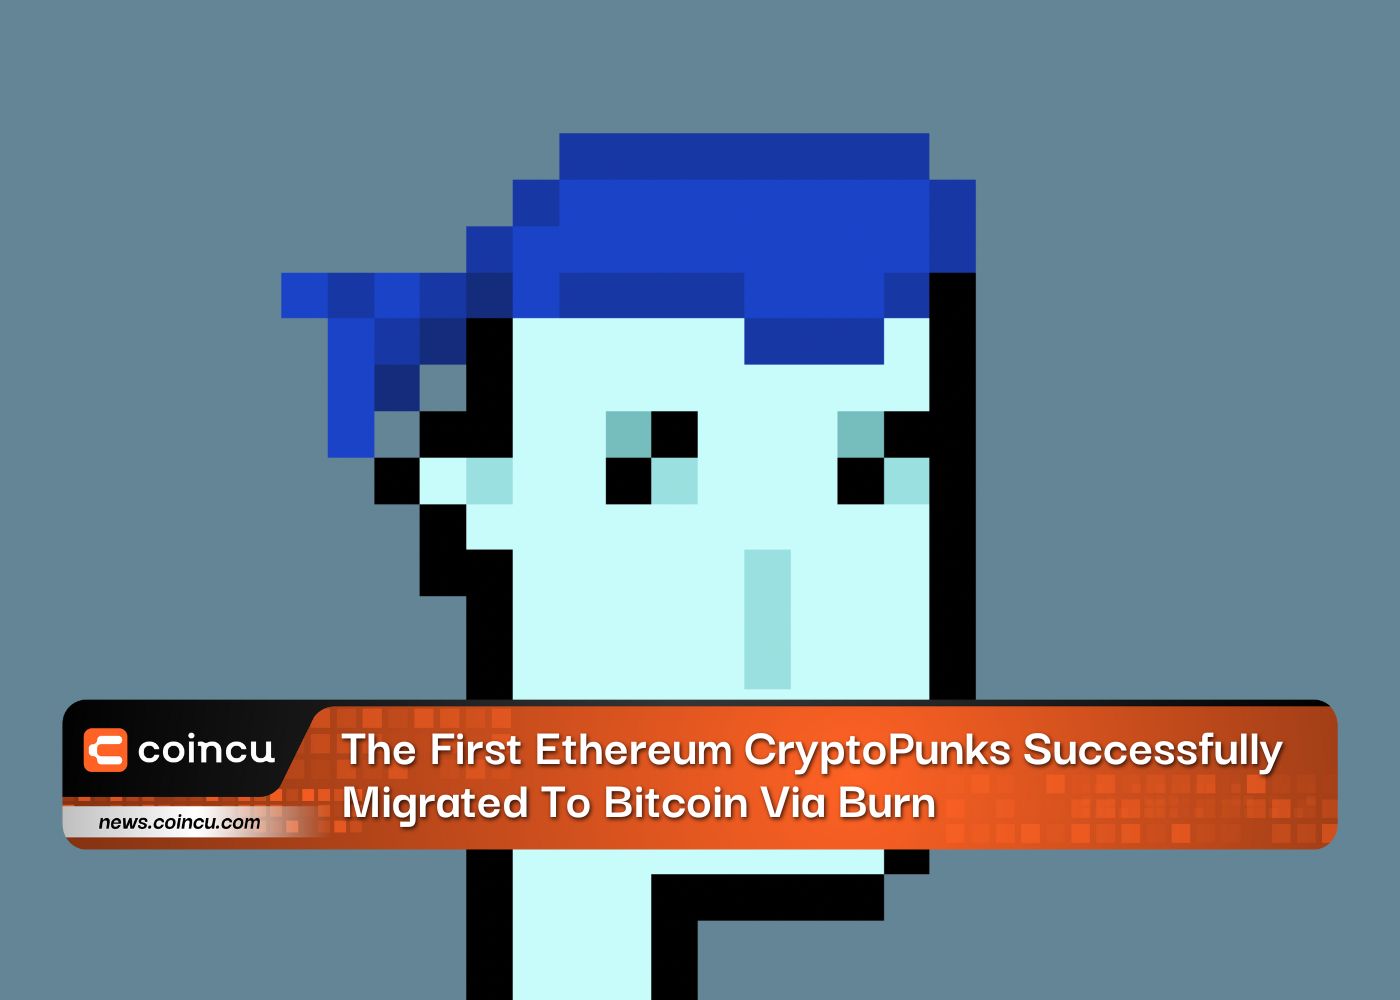 The First Ethereum CryptoPunks Successfully Migrated To Bitcoin Via Burn